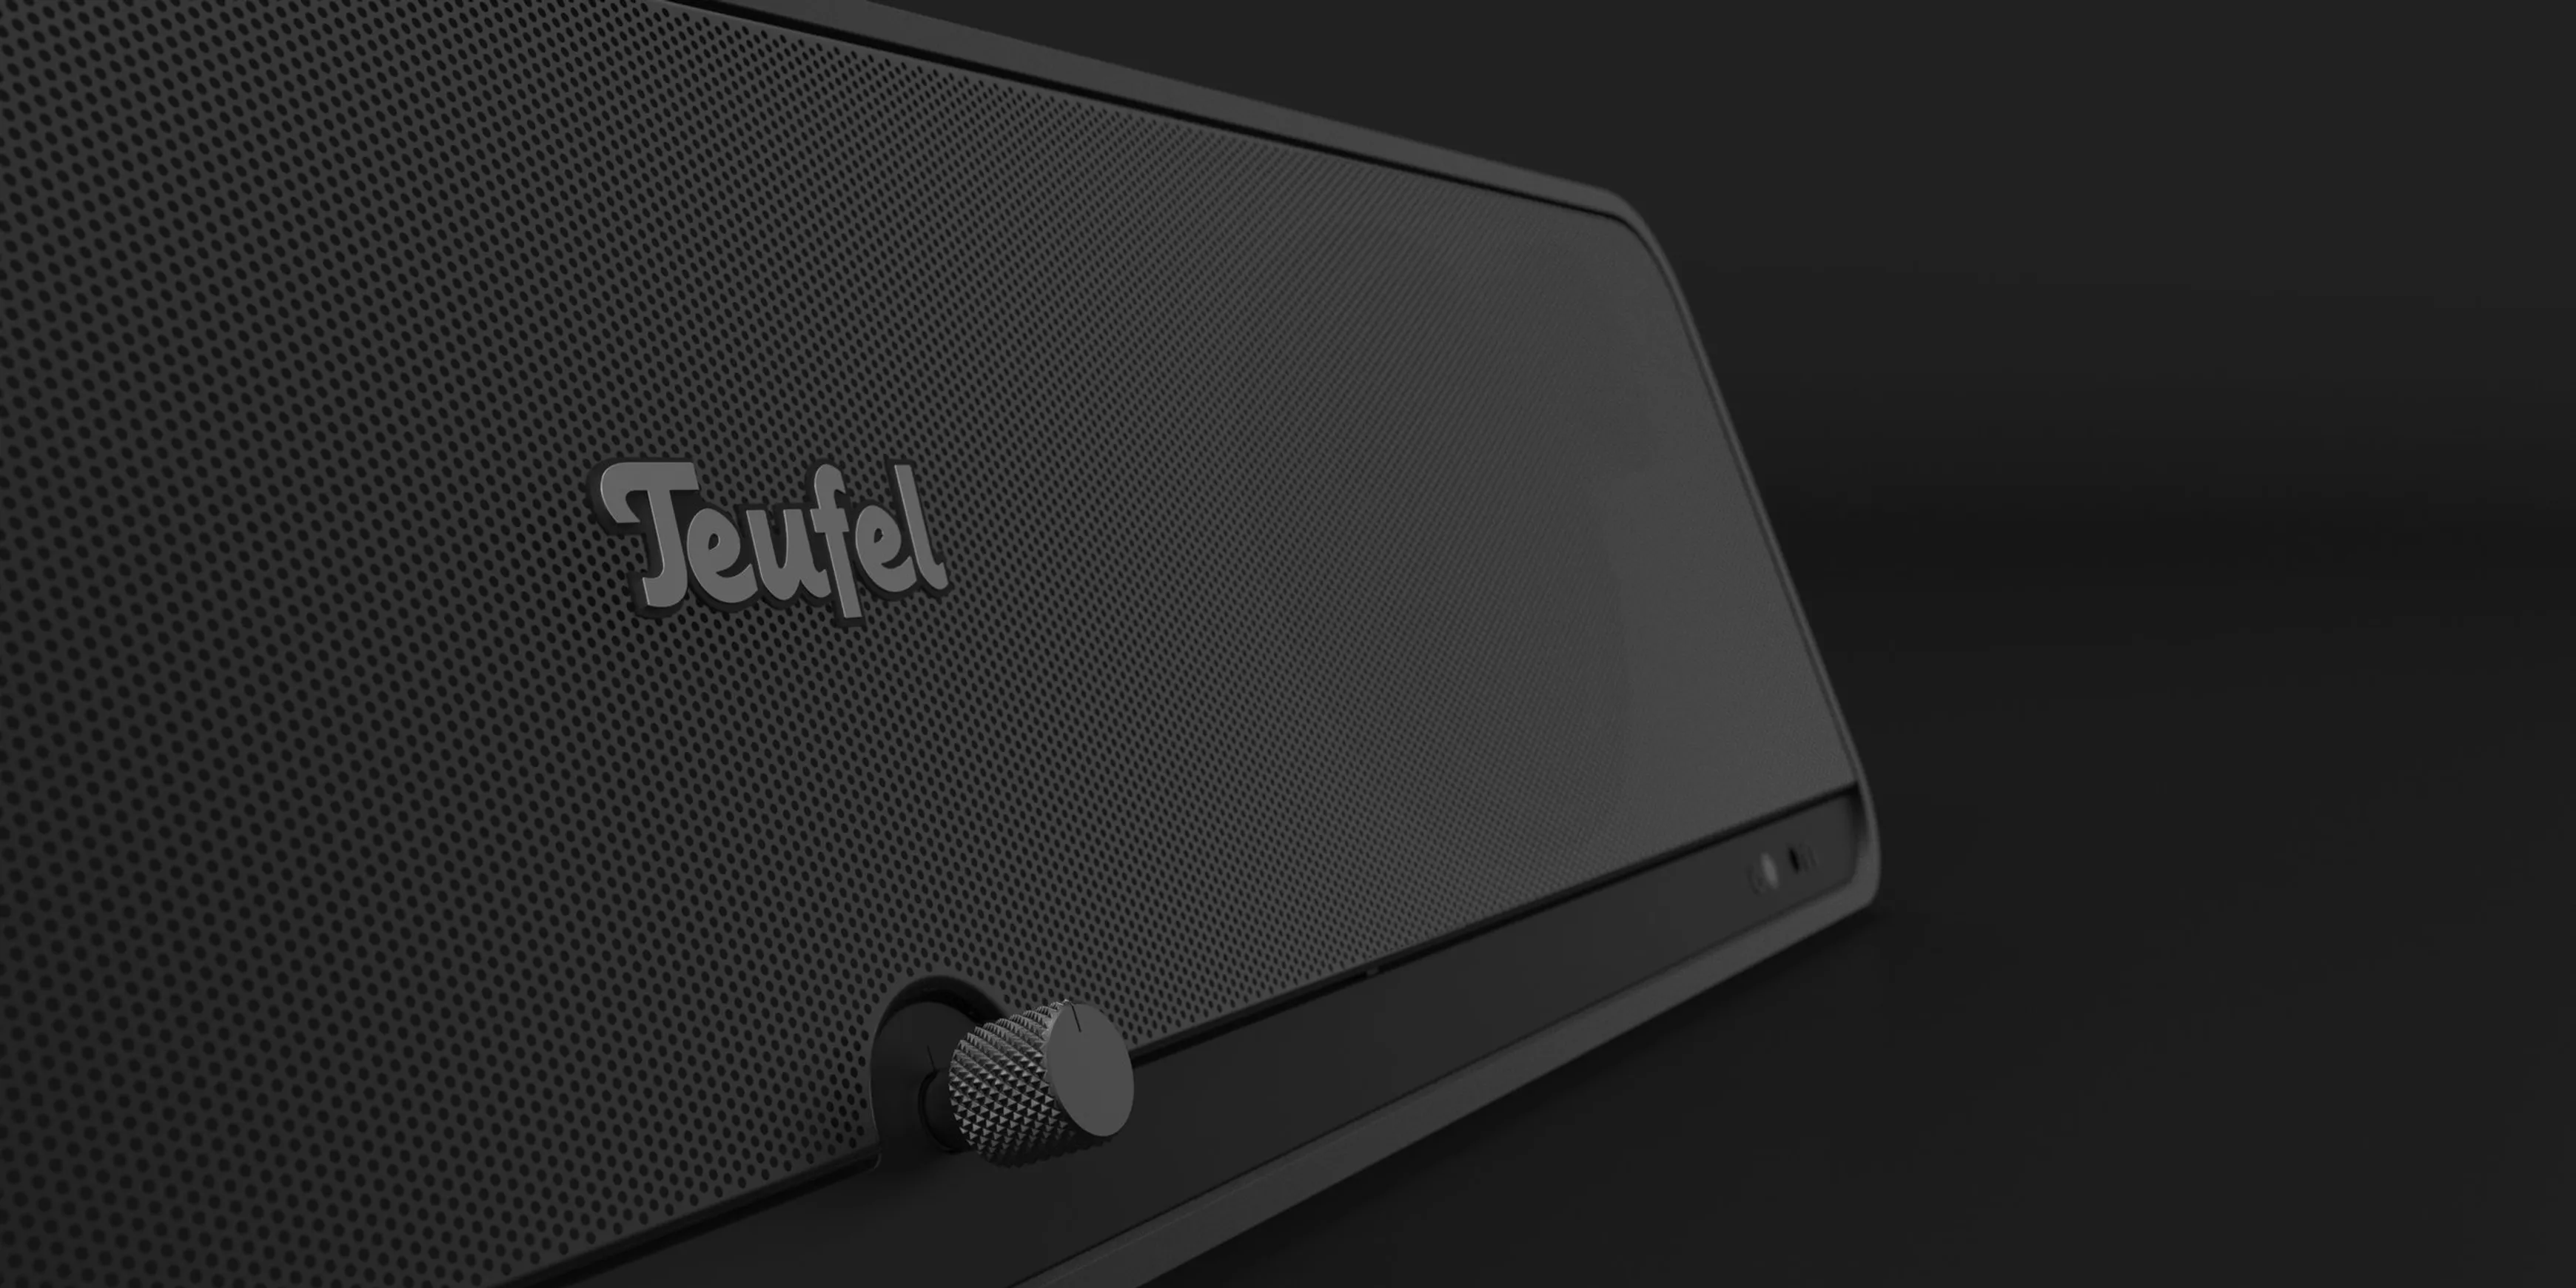 A detail shot of the Teufel Bamster speaker in front of a black background